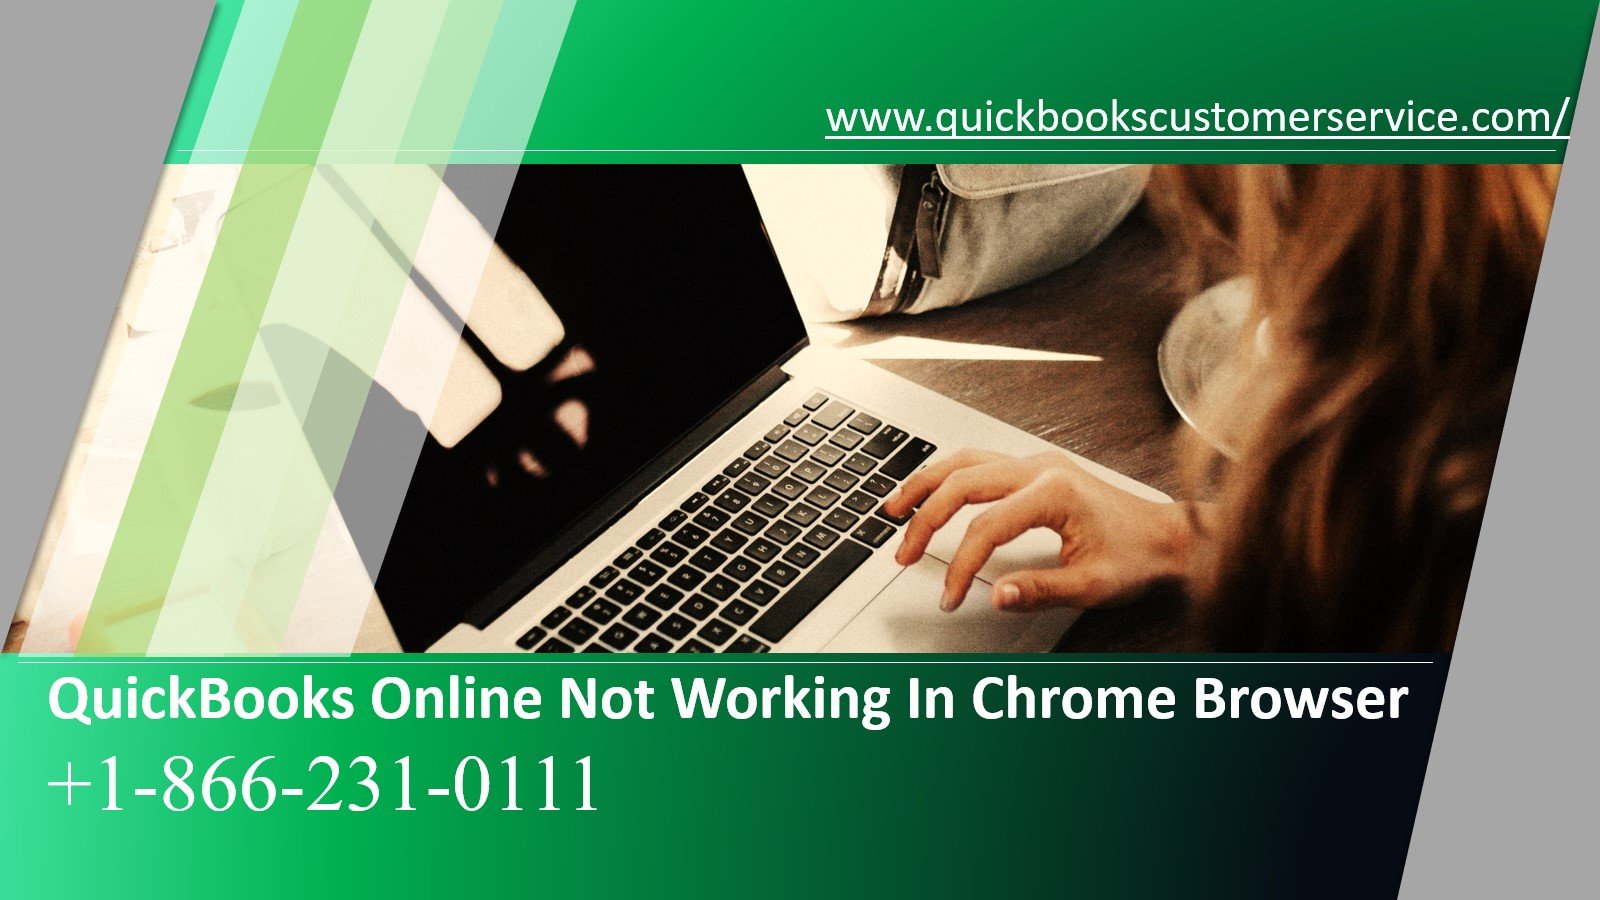 How To Fix QuickBooks Online Not Working In Chrome Browser?